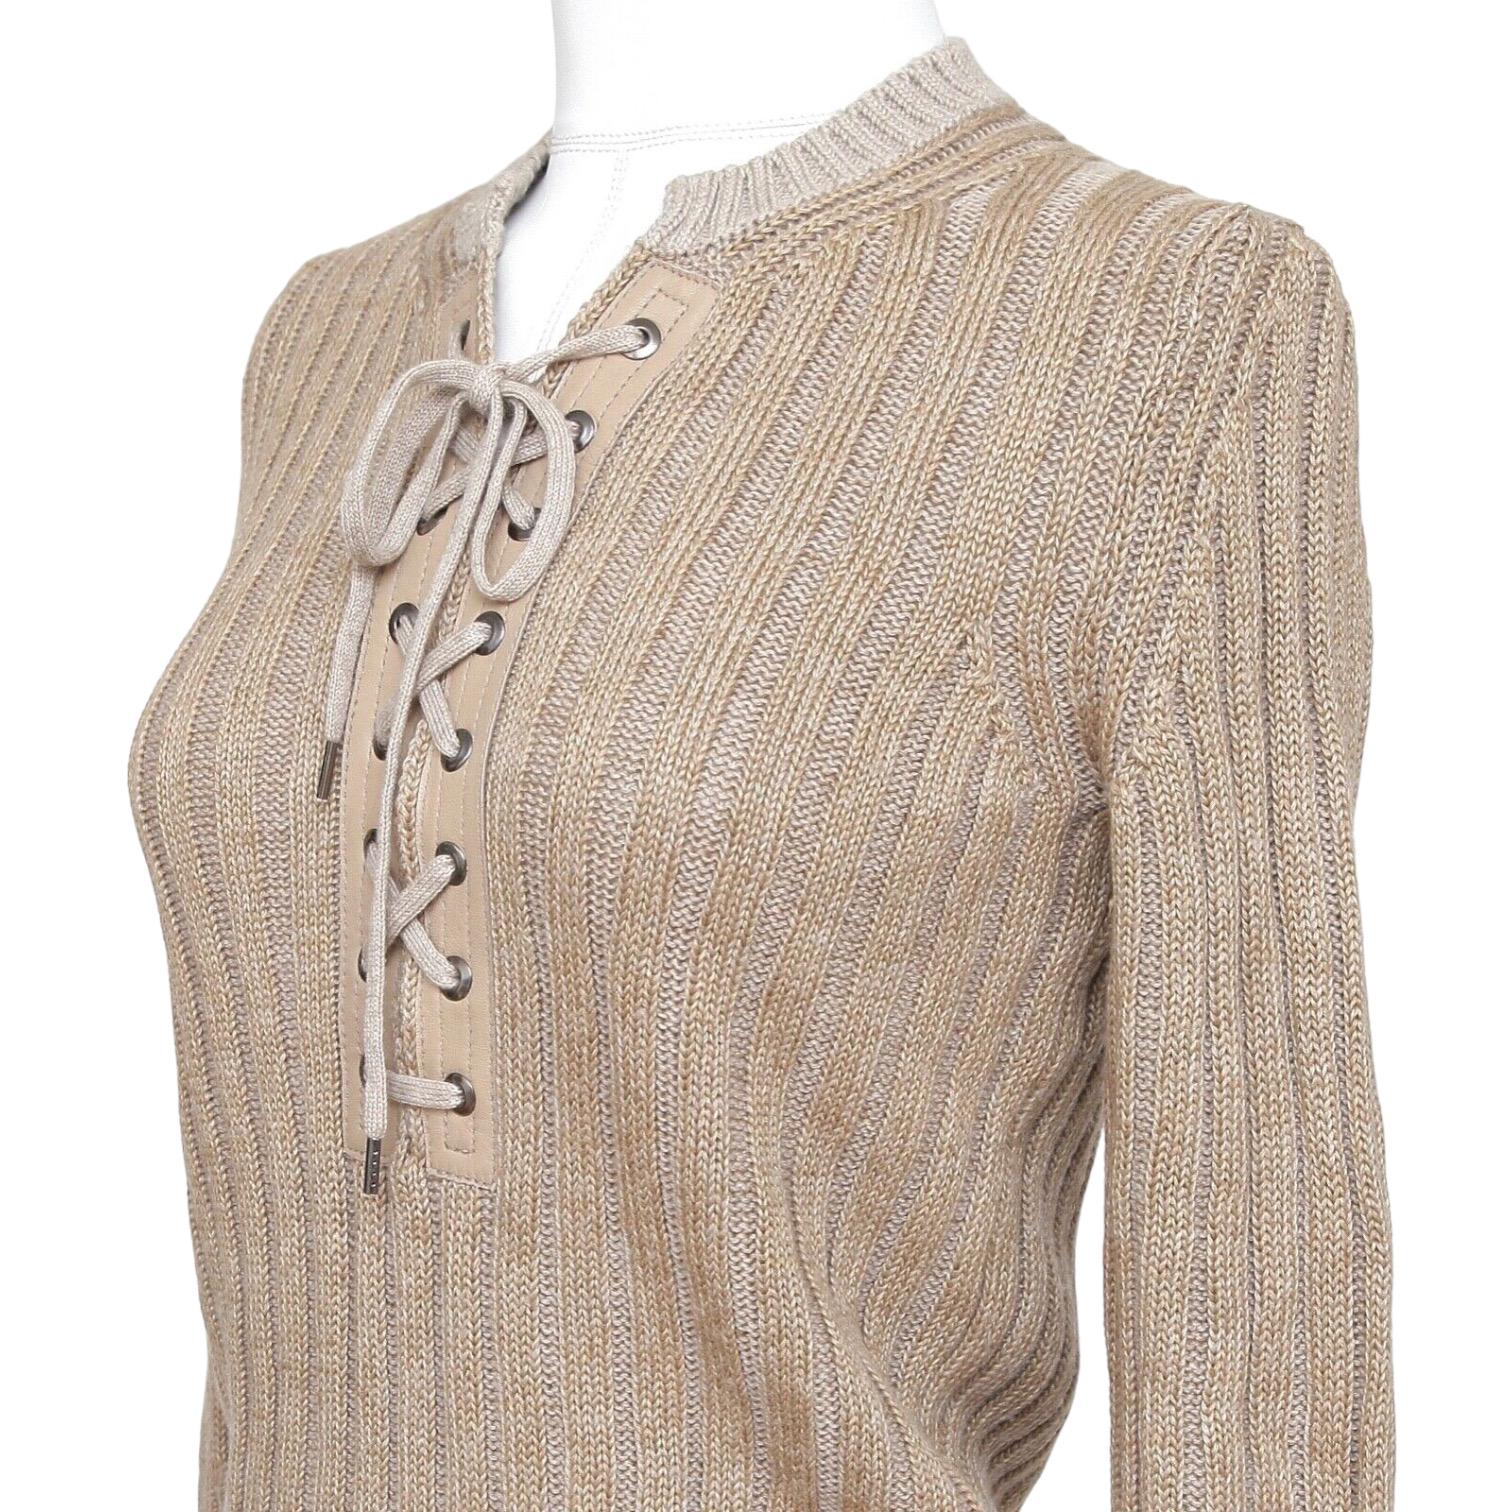 CHLOE Top Sweater Knit 3/4 Sleeve Beige Leather Ribbed Sz XS 2011 1